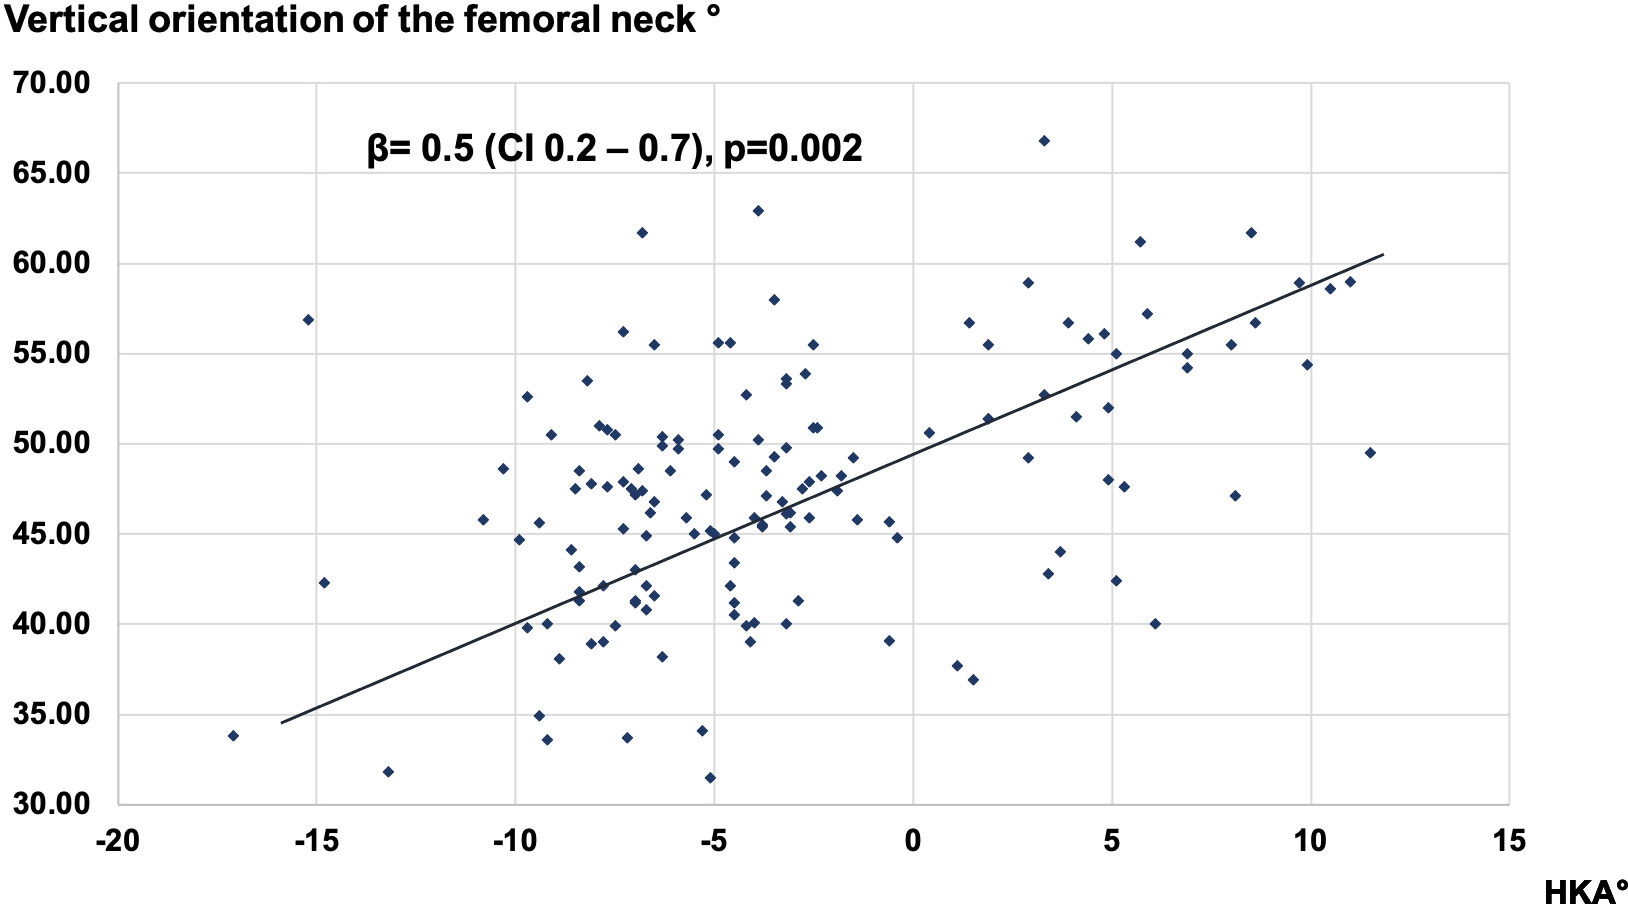 Fig. 2 
          Linear regression demonstrating the association between the frontal knee alignment (hip-knee-ankle angle (HKA)) and the vertical orientation of the femoral neck. CI, confidence interval.
        